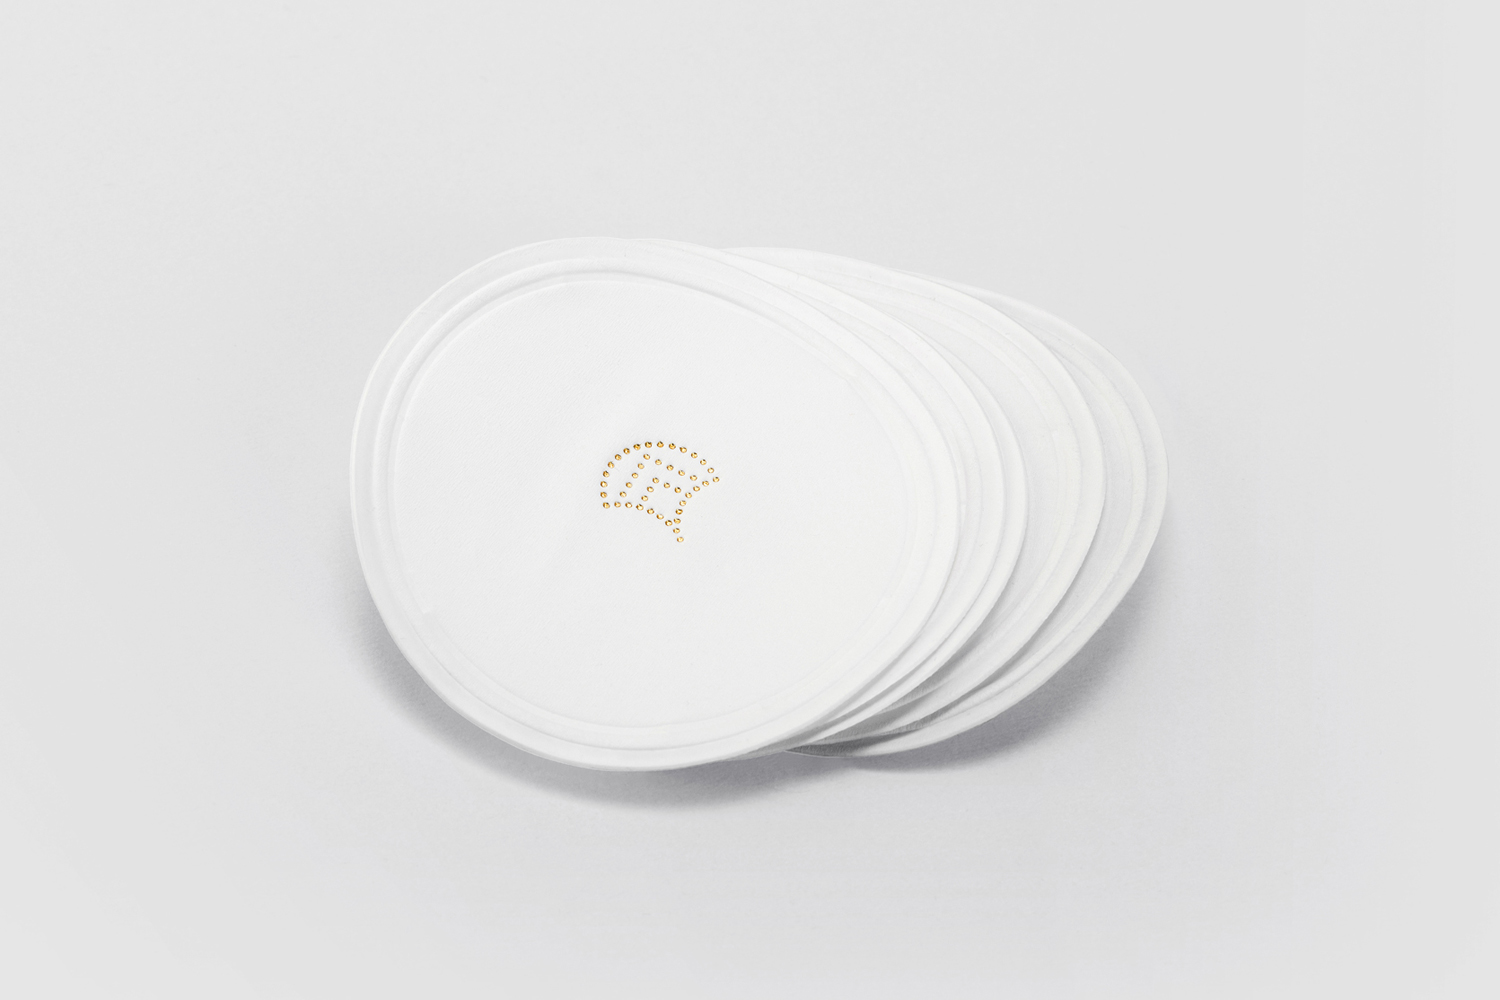 Blind embossed and gold foiled coasters by London-based studio Two Times Elliott for Soho members bar Disrepute